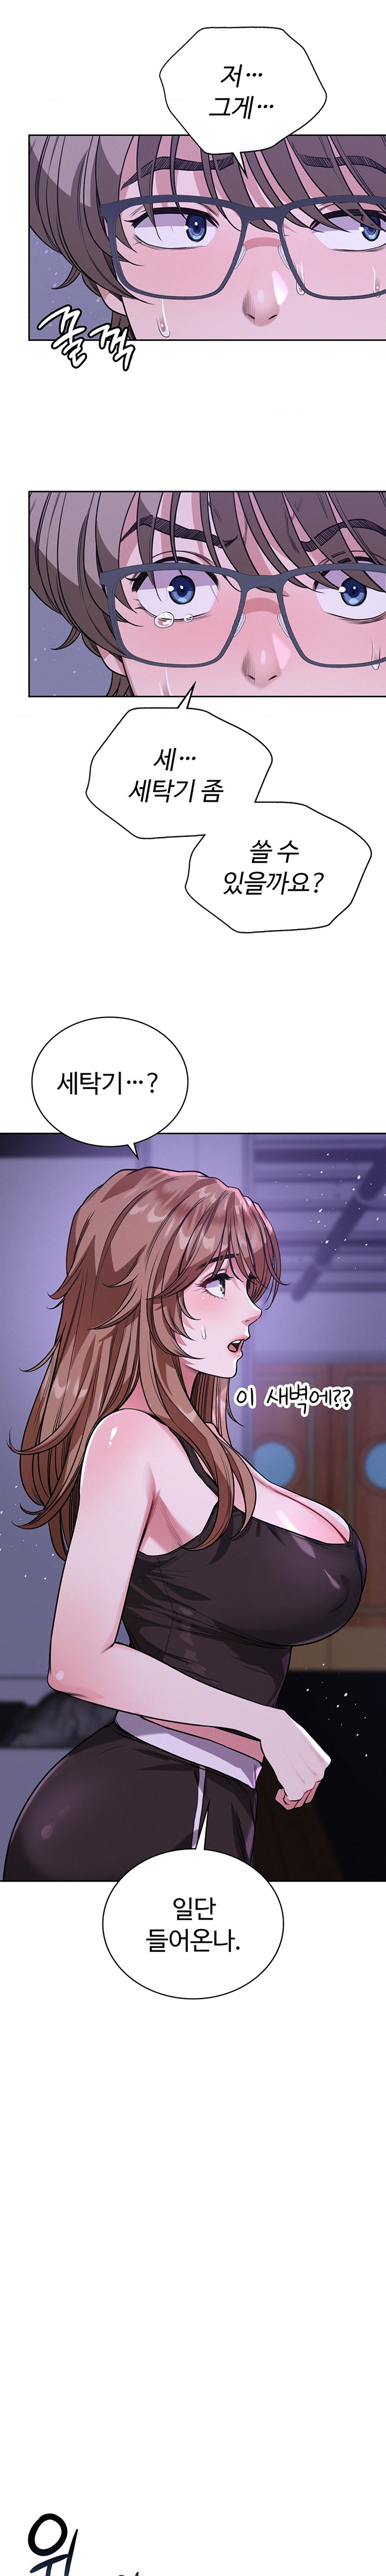 My Stowaway Diary Raw - Chapter 4 Page 6